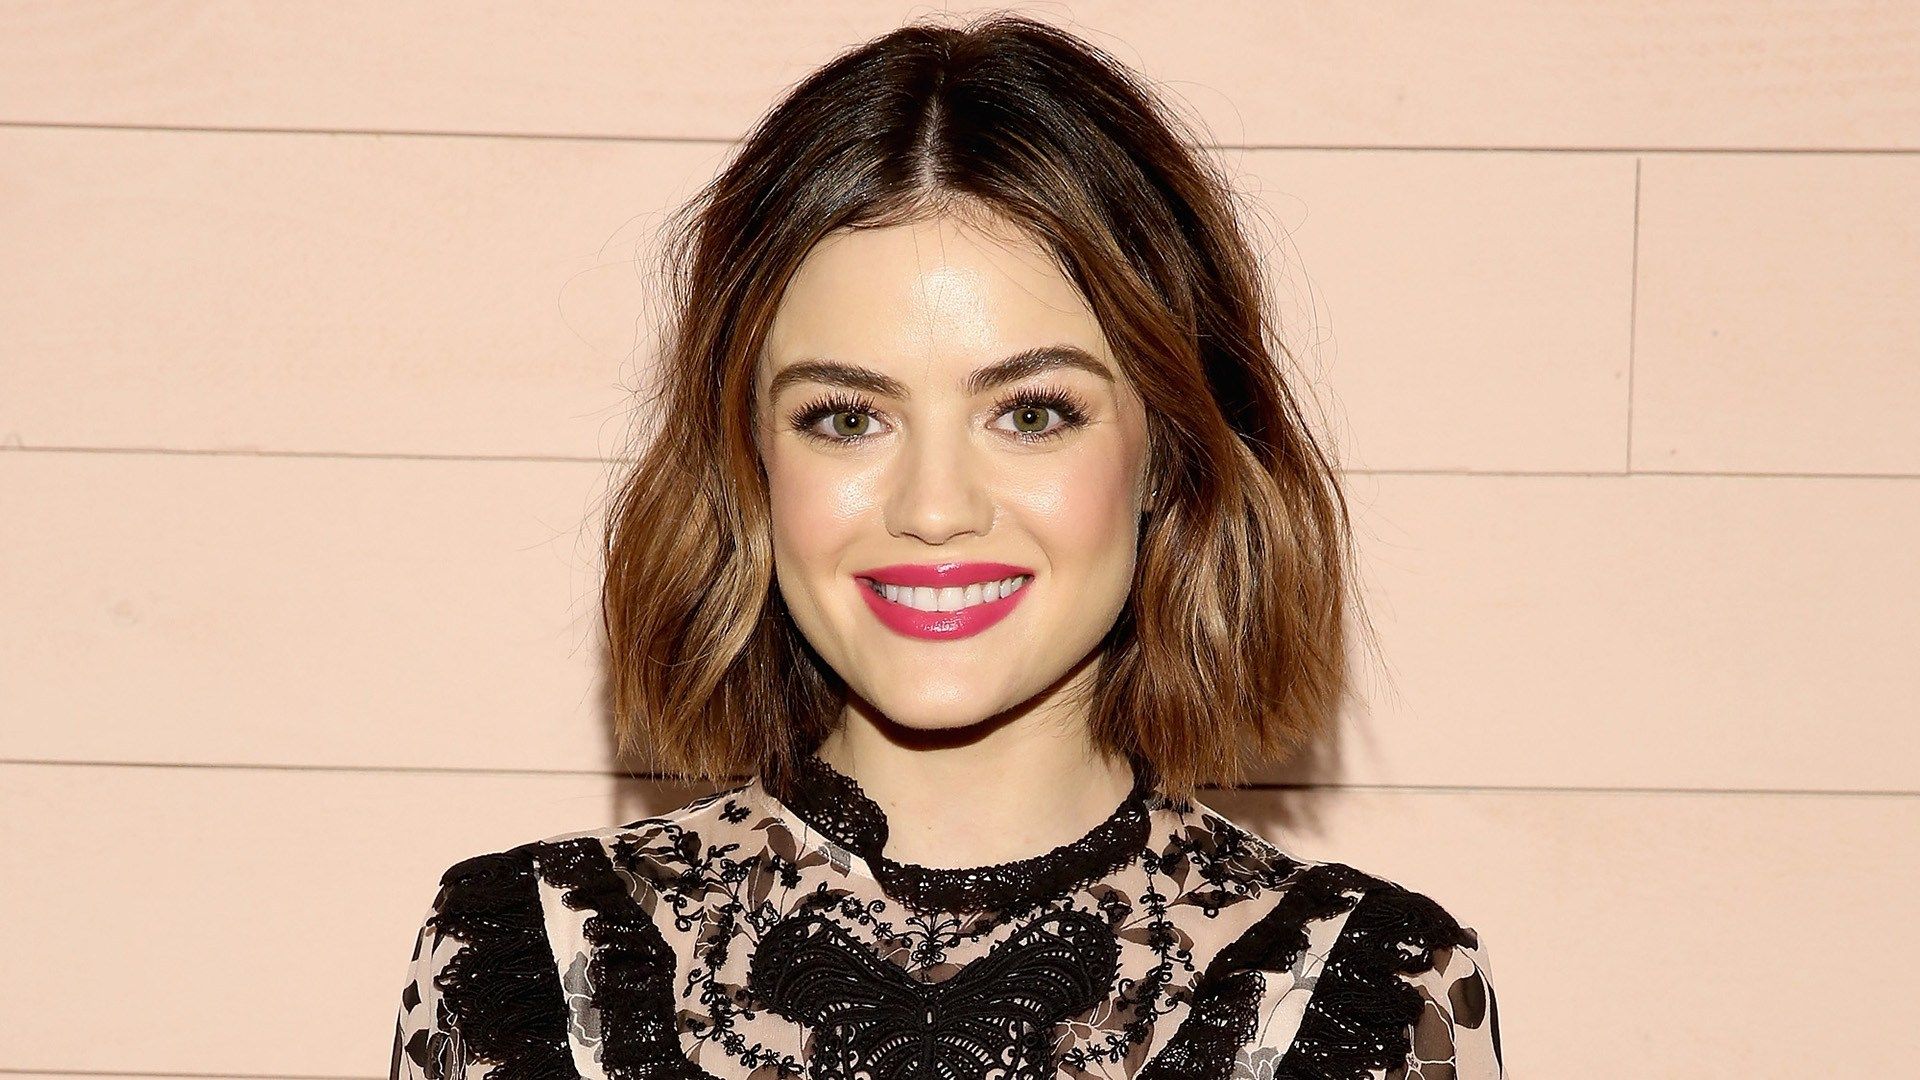 Lucy Hale Makes The Case For Why Retinol Needs To Be In Your Skin Care Routine